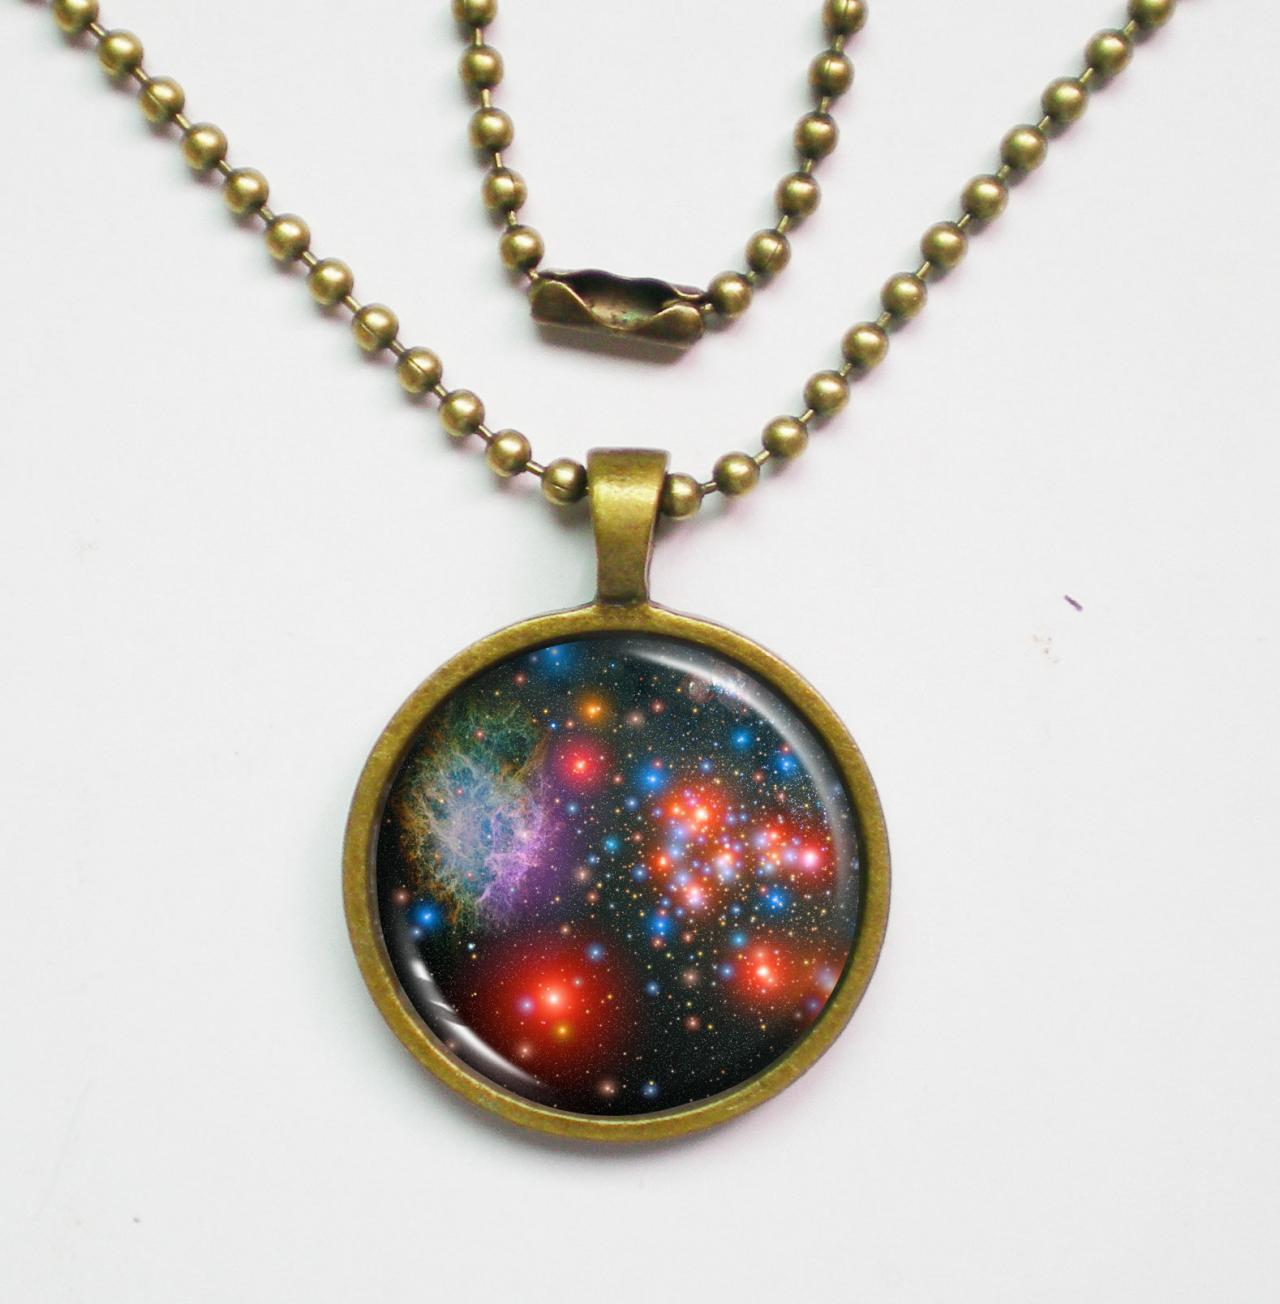 Star Image Necklace - Star Clusters In Milky Way - Galaxy Series on Luulla